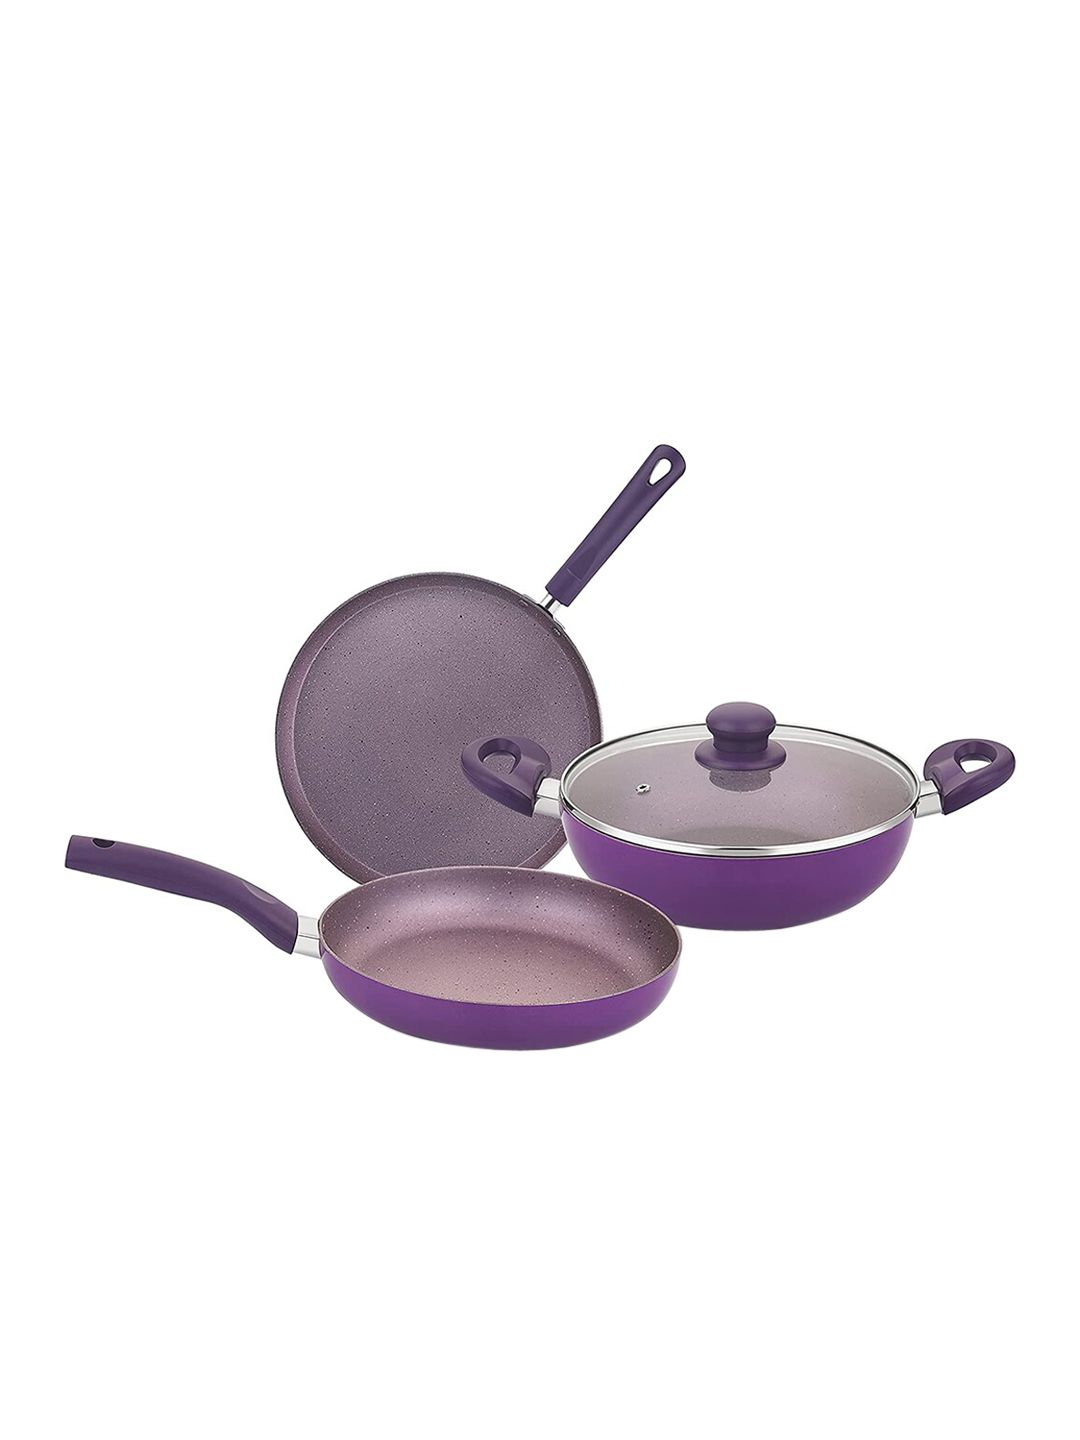 BERGNER Set of 3 Purple Non-Stick Cookware Set Price in India